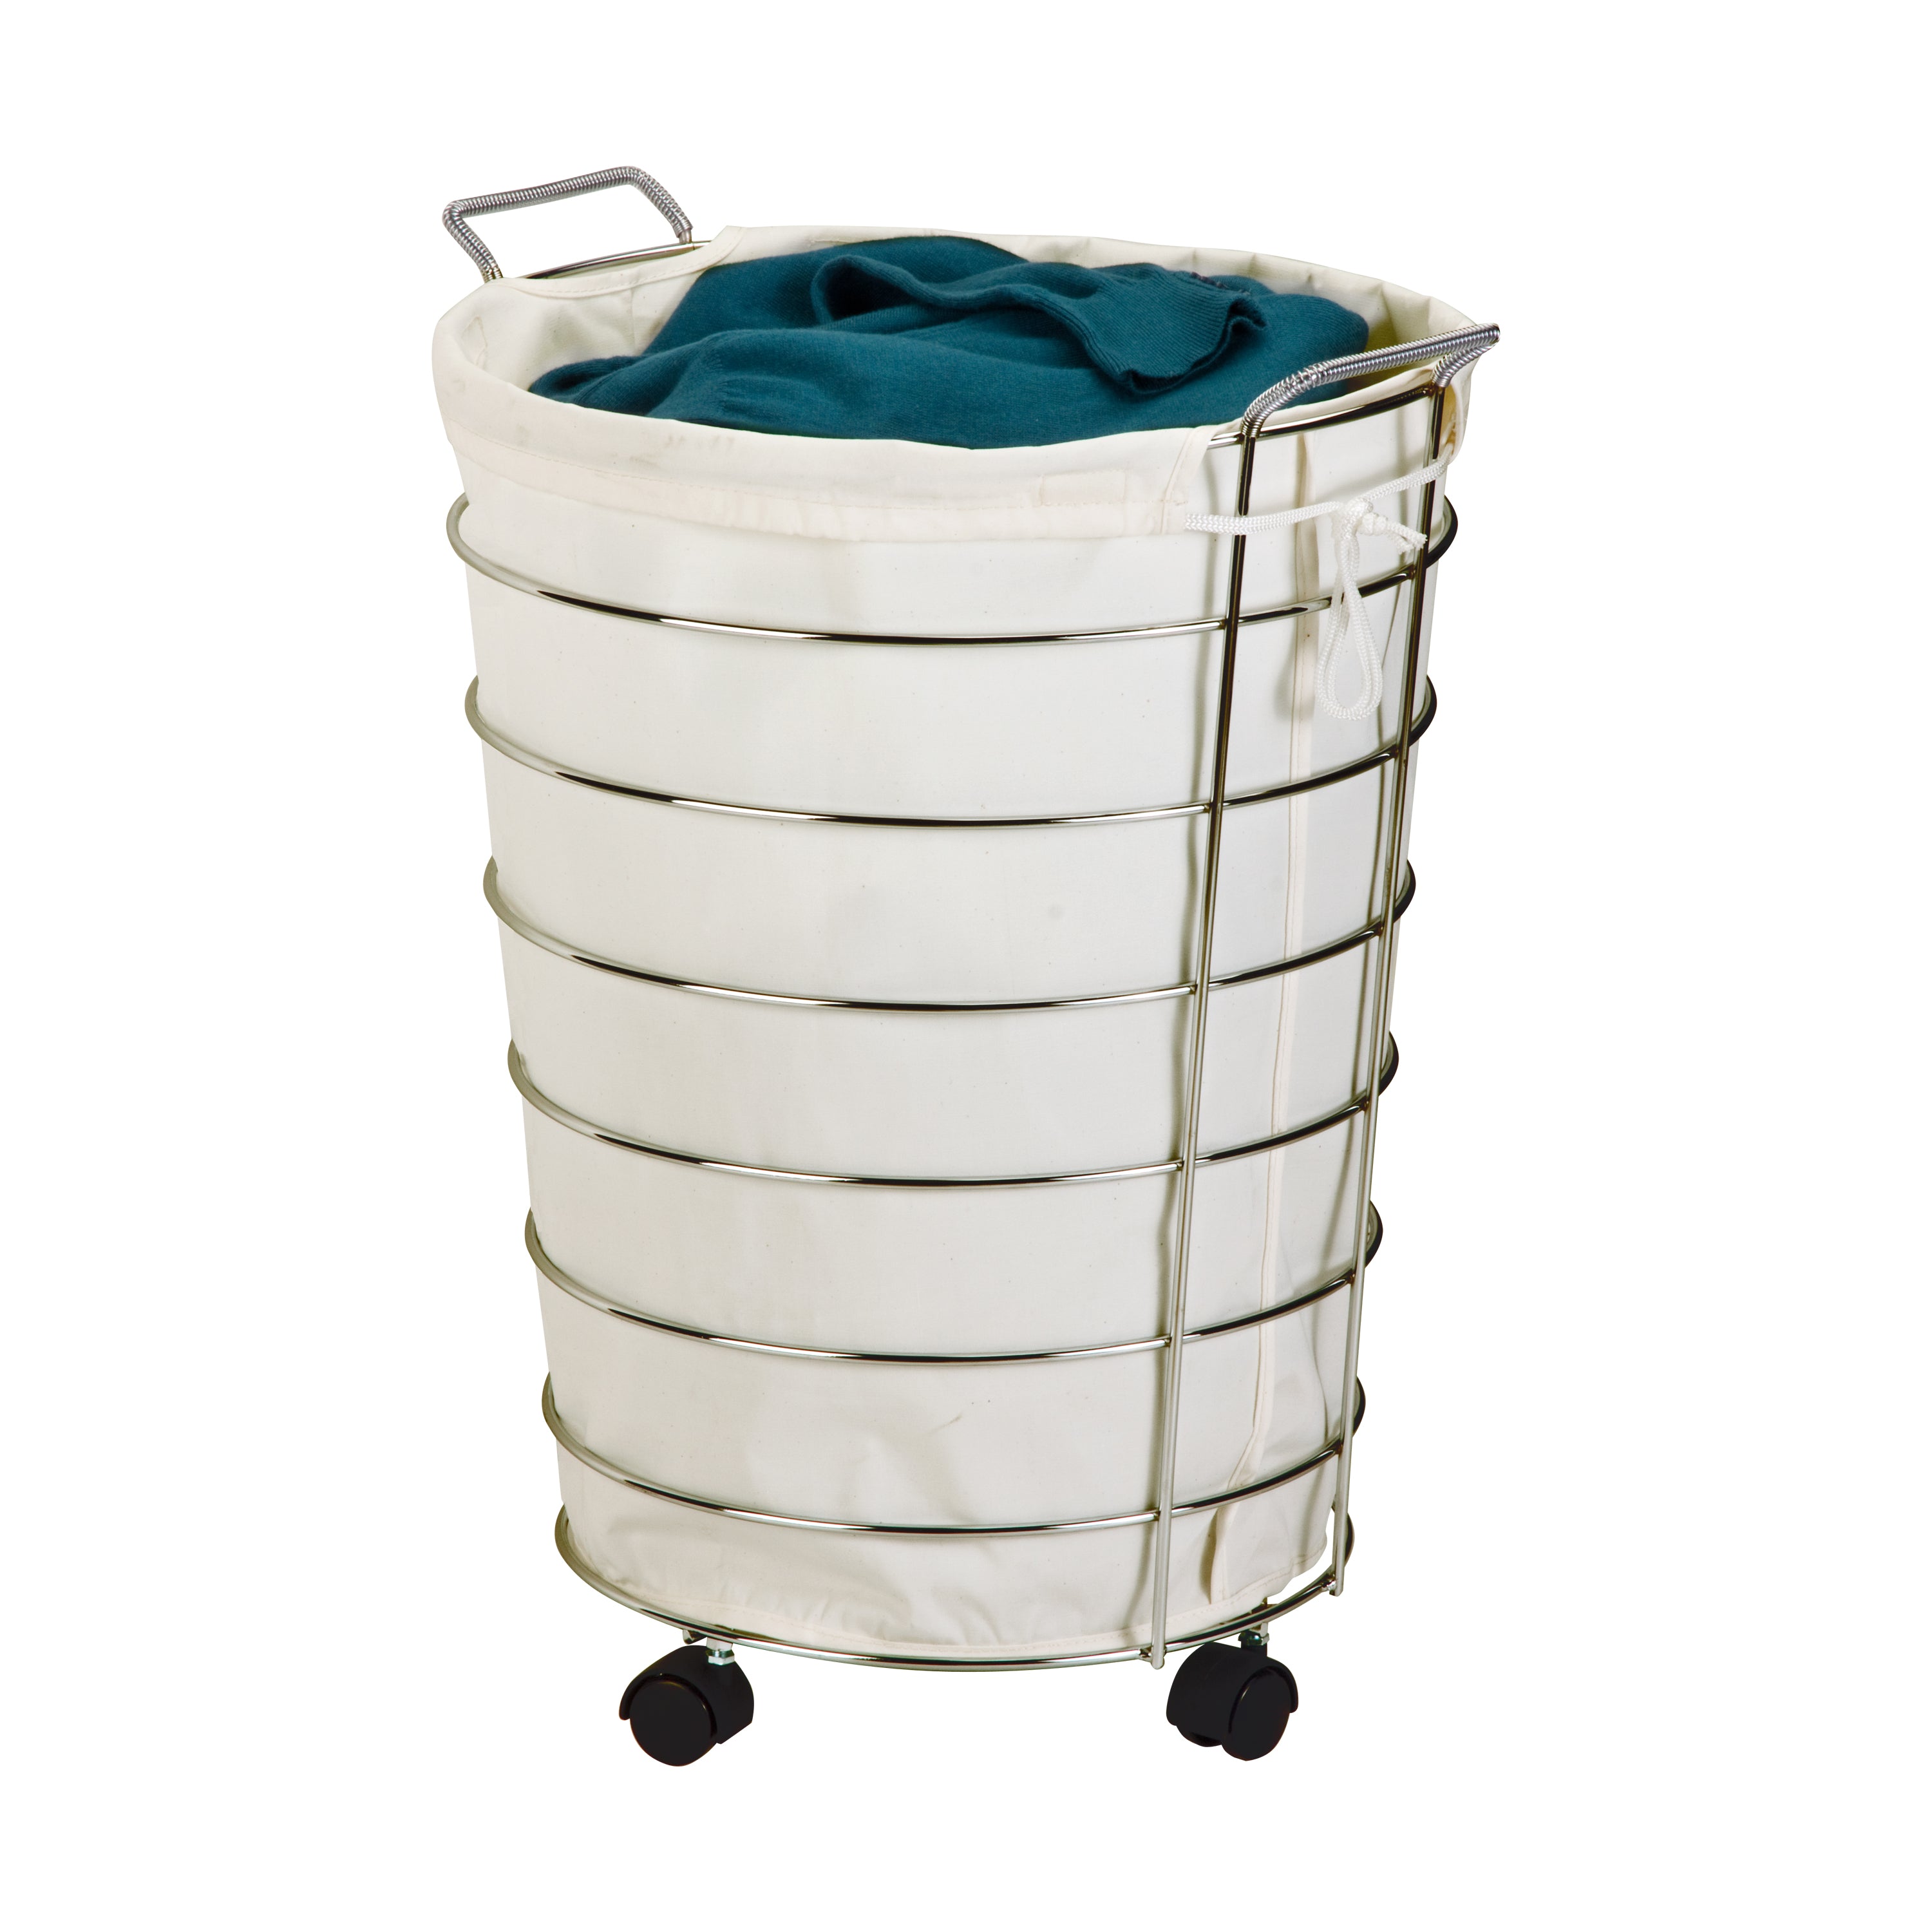  Garment Bag - Laundry Bags / Laundry Storage Products